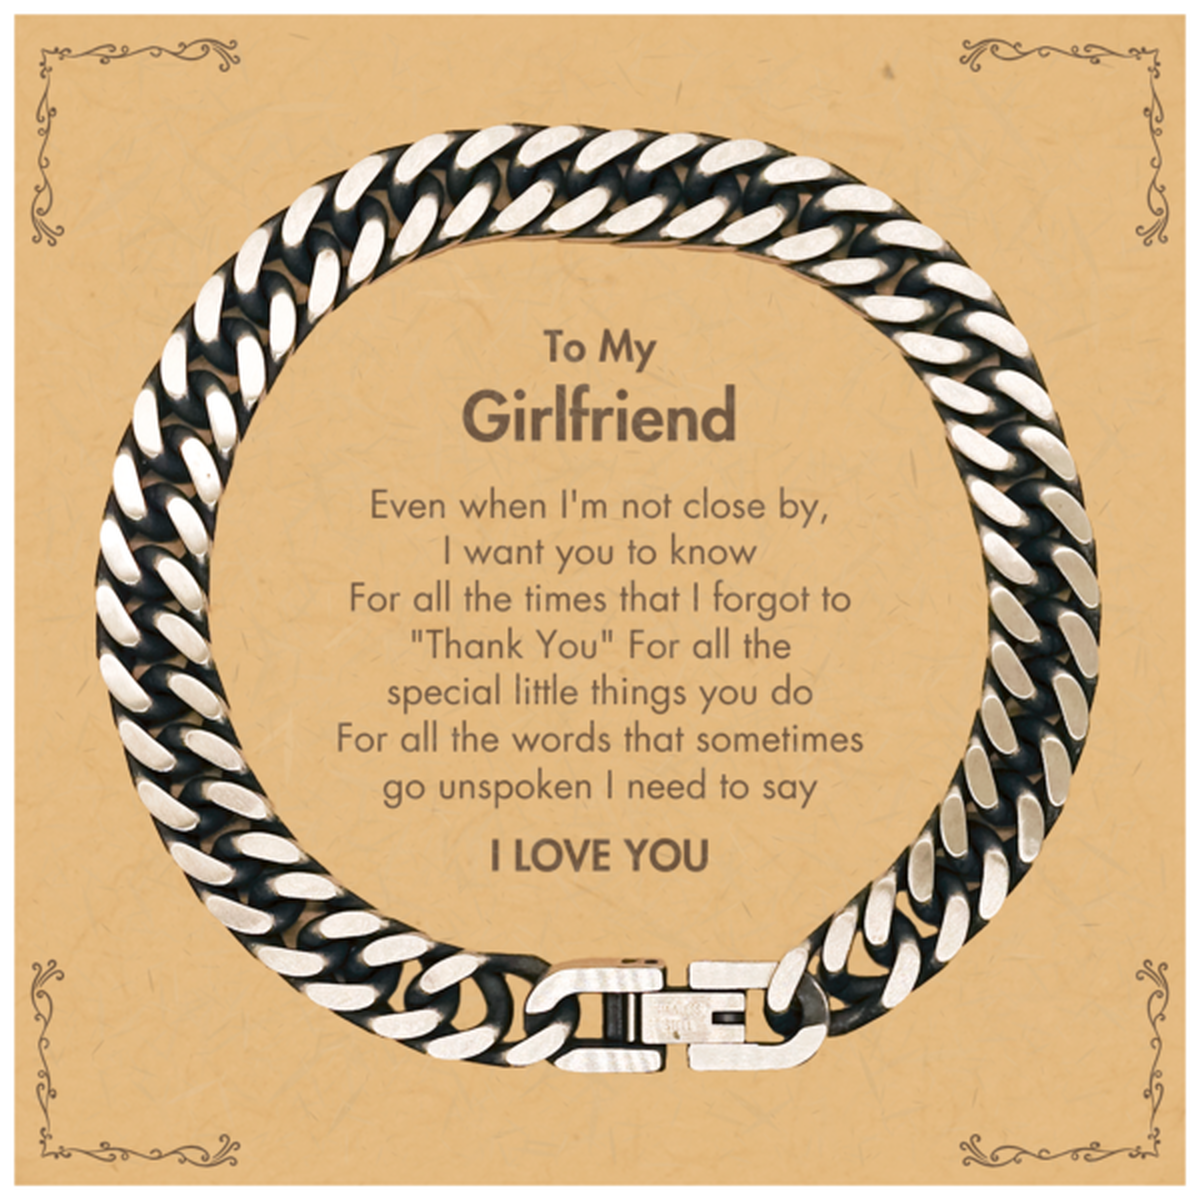 Thank You Gifts for Girlfriend, Keepsake Cuban Link Chain Bracelet Gifts for Girlfriend Birthday Mother's day Father's Day Girlfriend For all the words That sometimes go unspoken I need to say I LOVE YOU